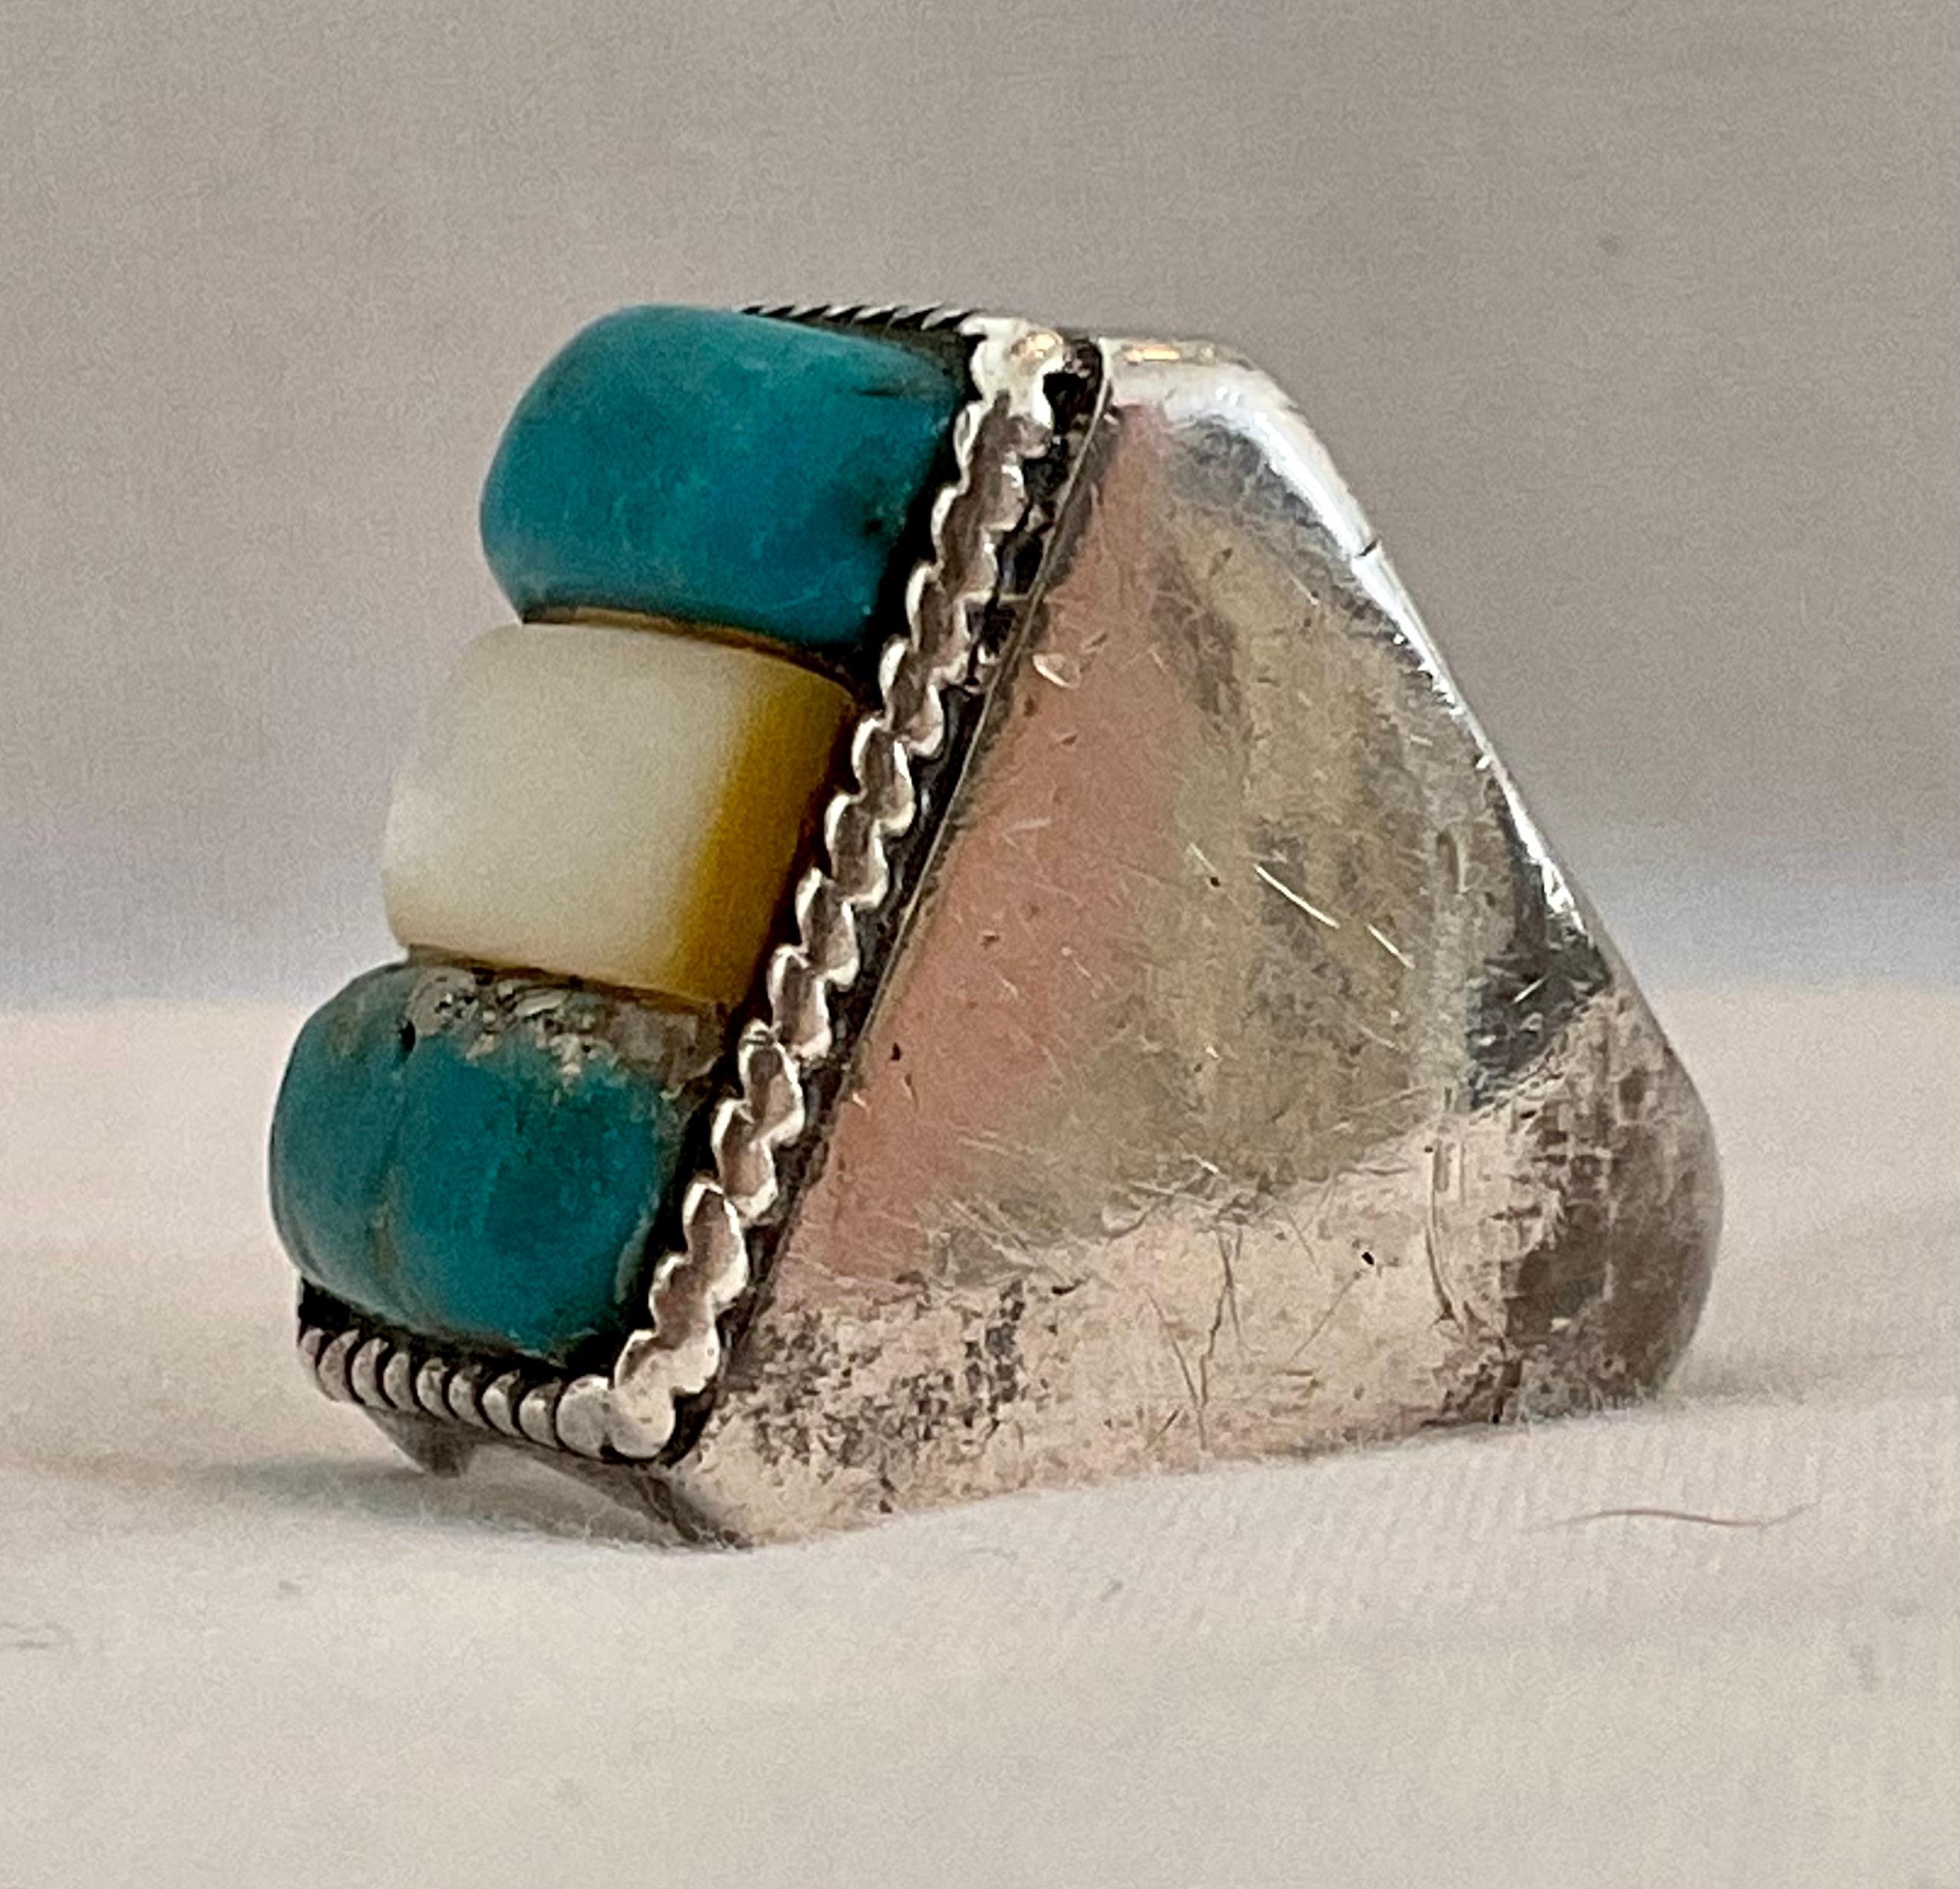 This Native American men's ring is one of a kind, as are the majority of my pieces. There are two incredible bands of turquoise with a mother of pearl centerpiece. Each band measures approximately 5/8